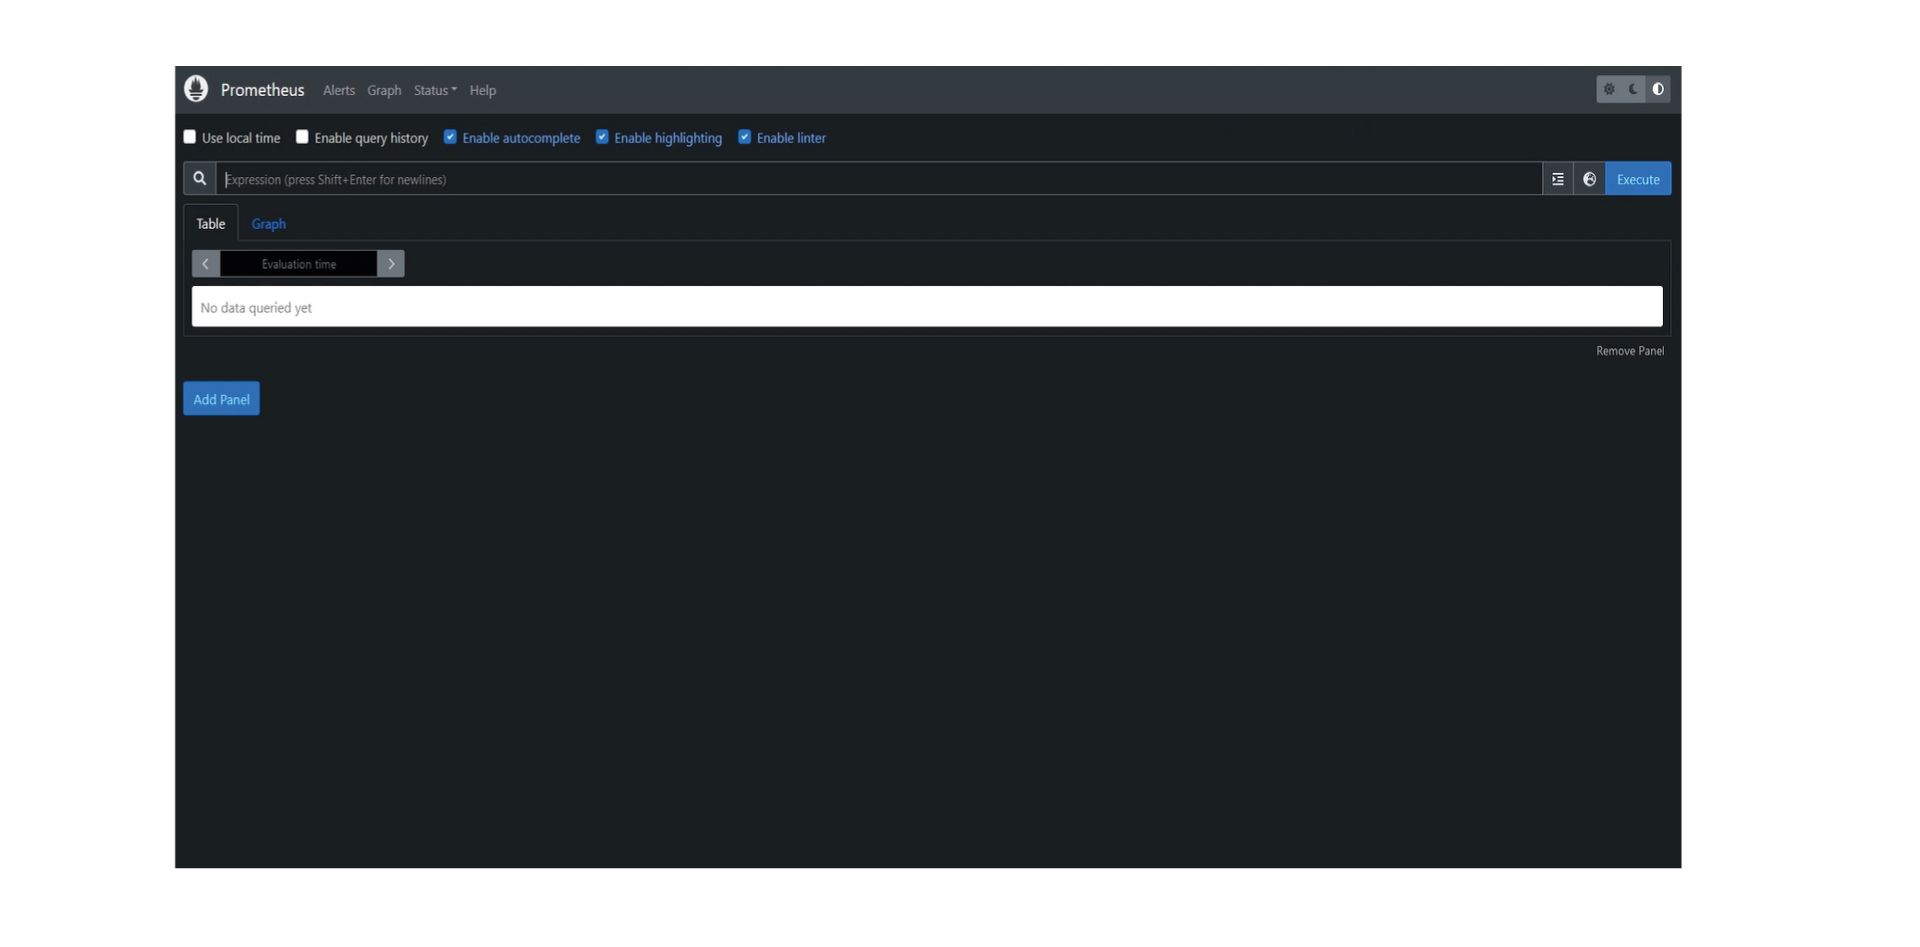 The image is a screenshot of the Prometheus web interface. It features a query bar with options to "Use local time", "Enable query history", "Enable autocomplete", "Enable highlighting", and "Enable linter". The interface is predominantly dark with a query input field labeled "Expression (press Shift+Enter for newlines)" and buttons for "Table" and "Graph" views. There is a message stating "No data queried yet" and a button to "Add Panel". The top navigation bar includes tabs for "Alerts", "Graph", "Status", and "Help". The overall layout is clean and utilitarian, designed for entering and evaluating data queries within Prometheus.